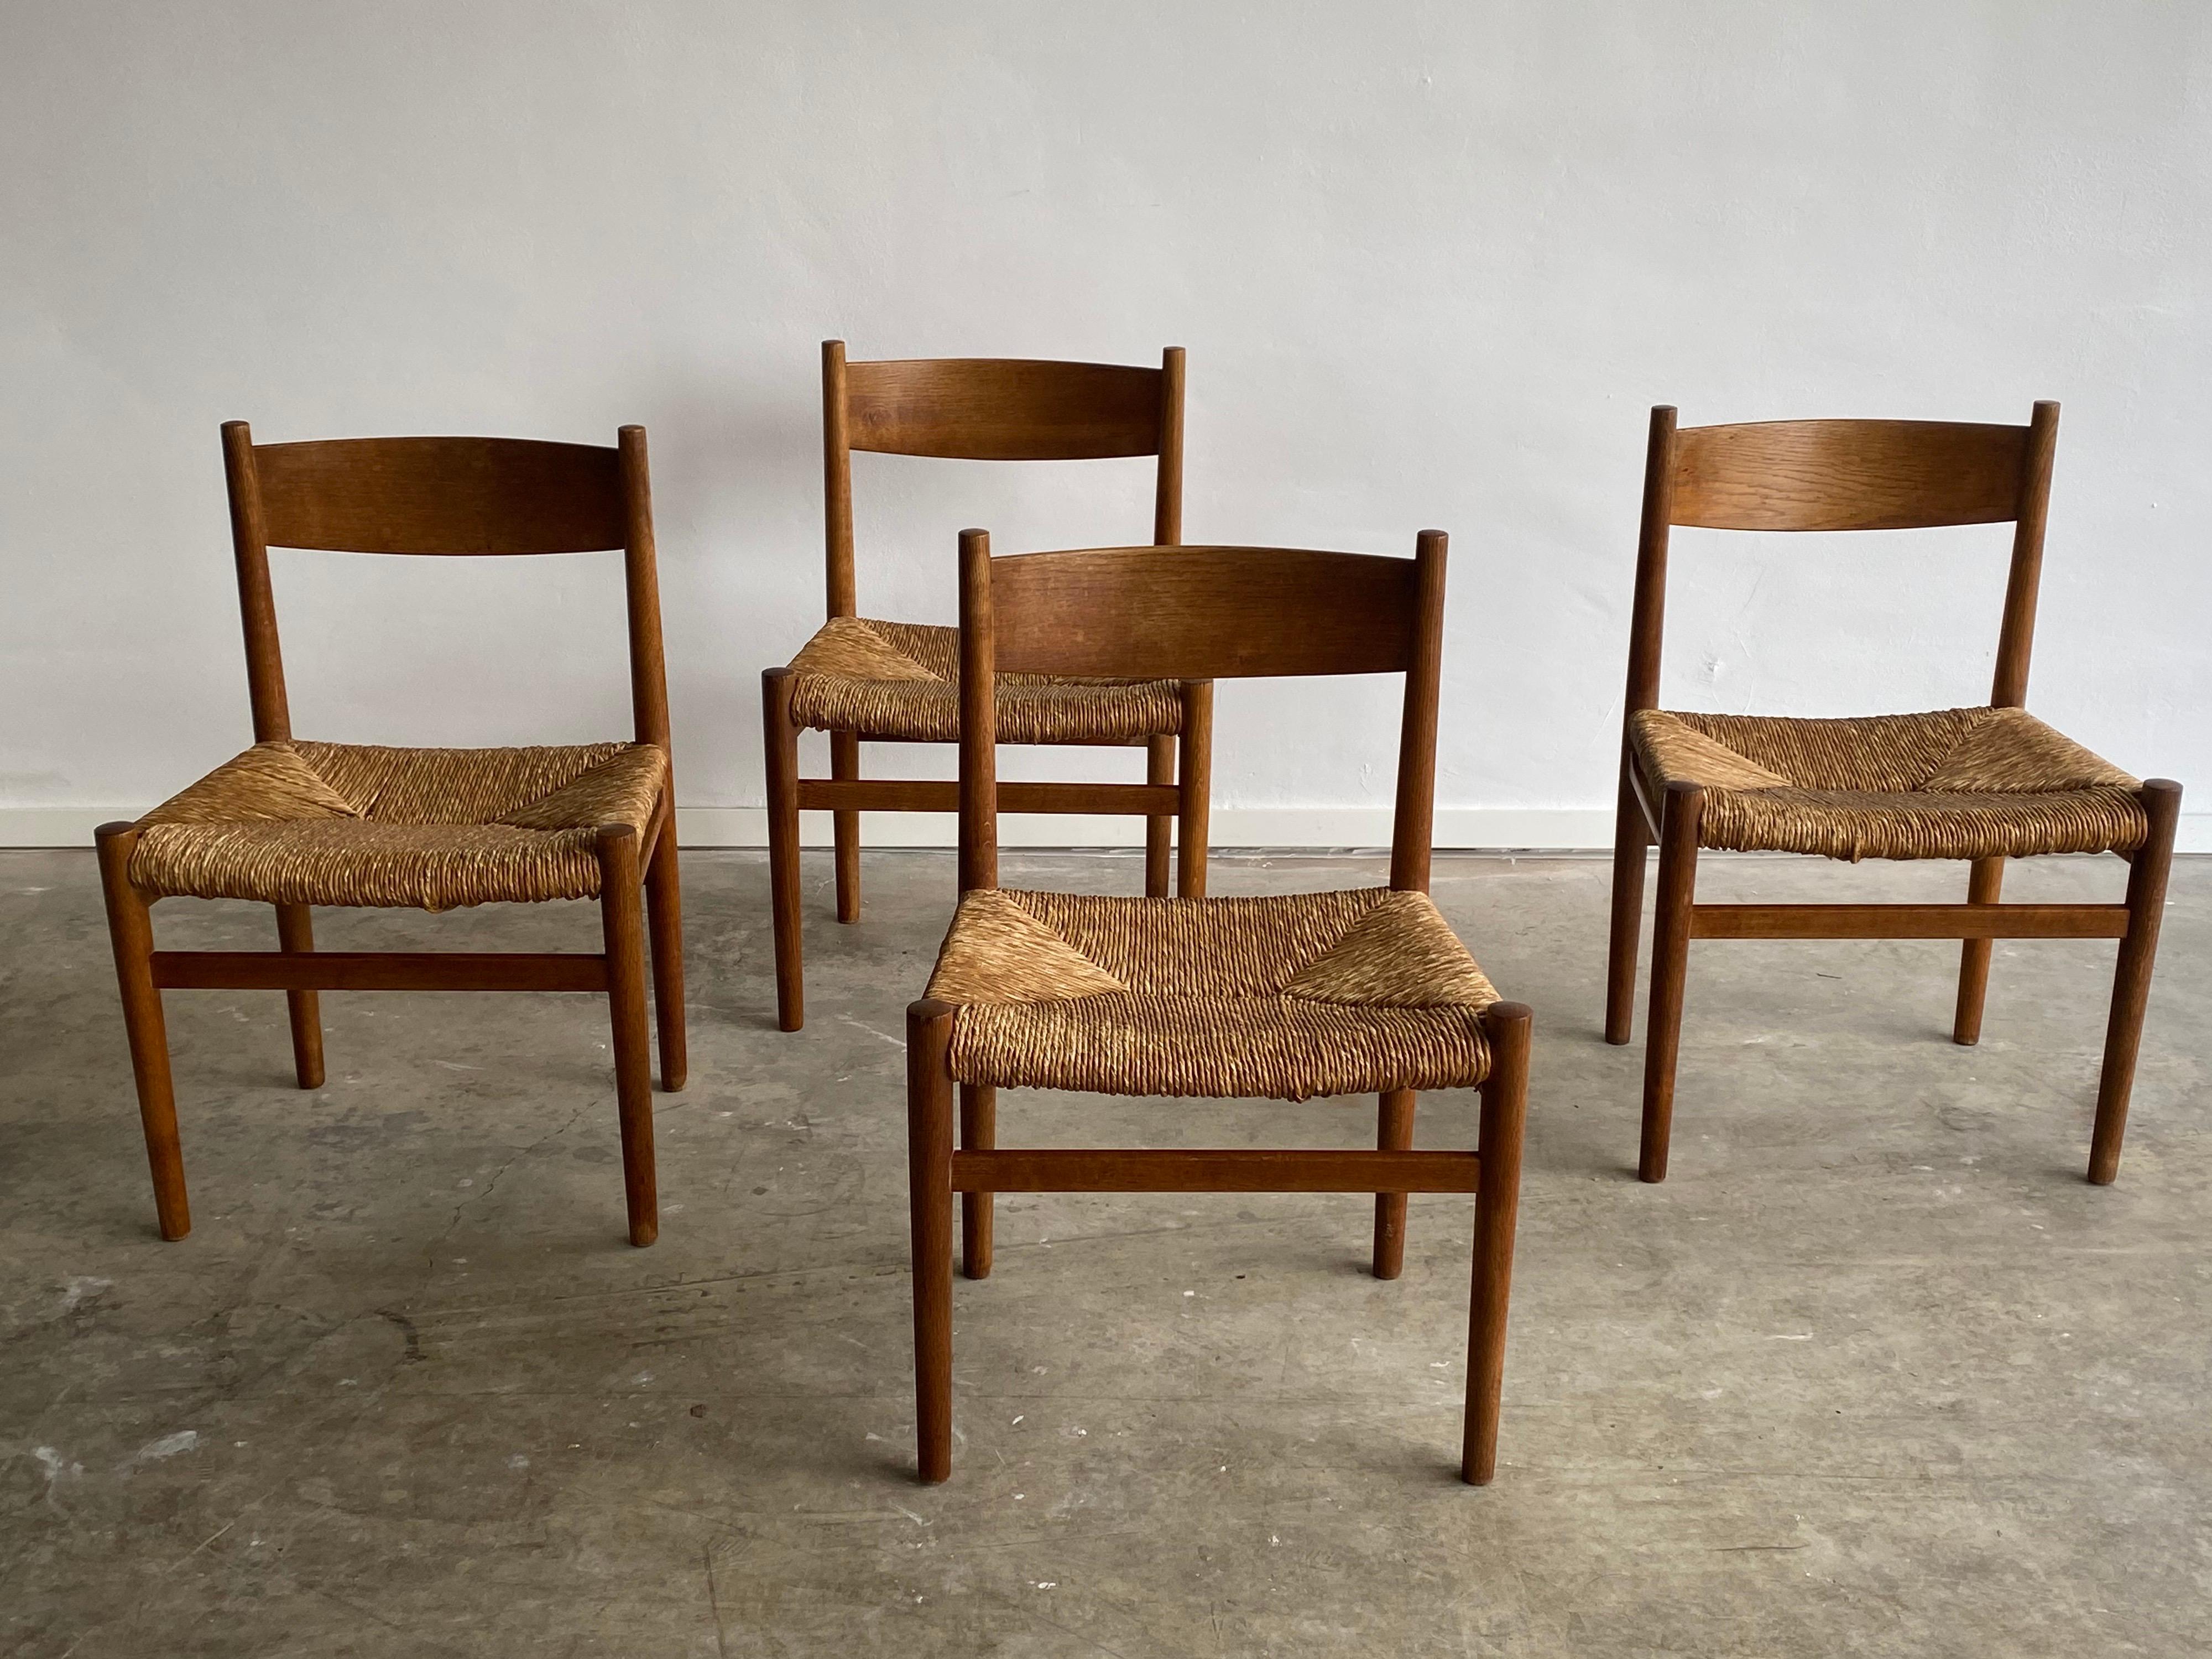 Set of four early mid-century dining chairs; much in the style of Hans Wegner and Børge Mogensen, Danish design. Quite rare because of their age and condition, the rush is still in good usable condition. At first glance the chairs seem very simple